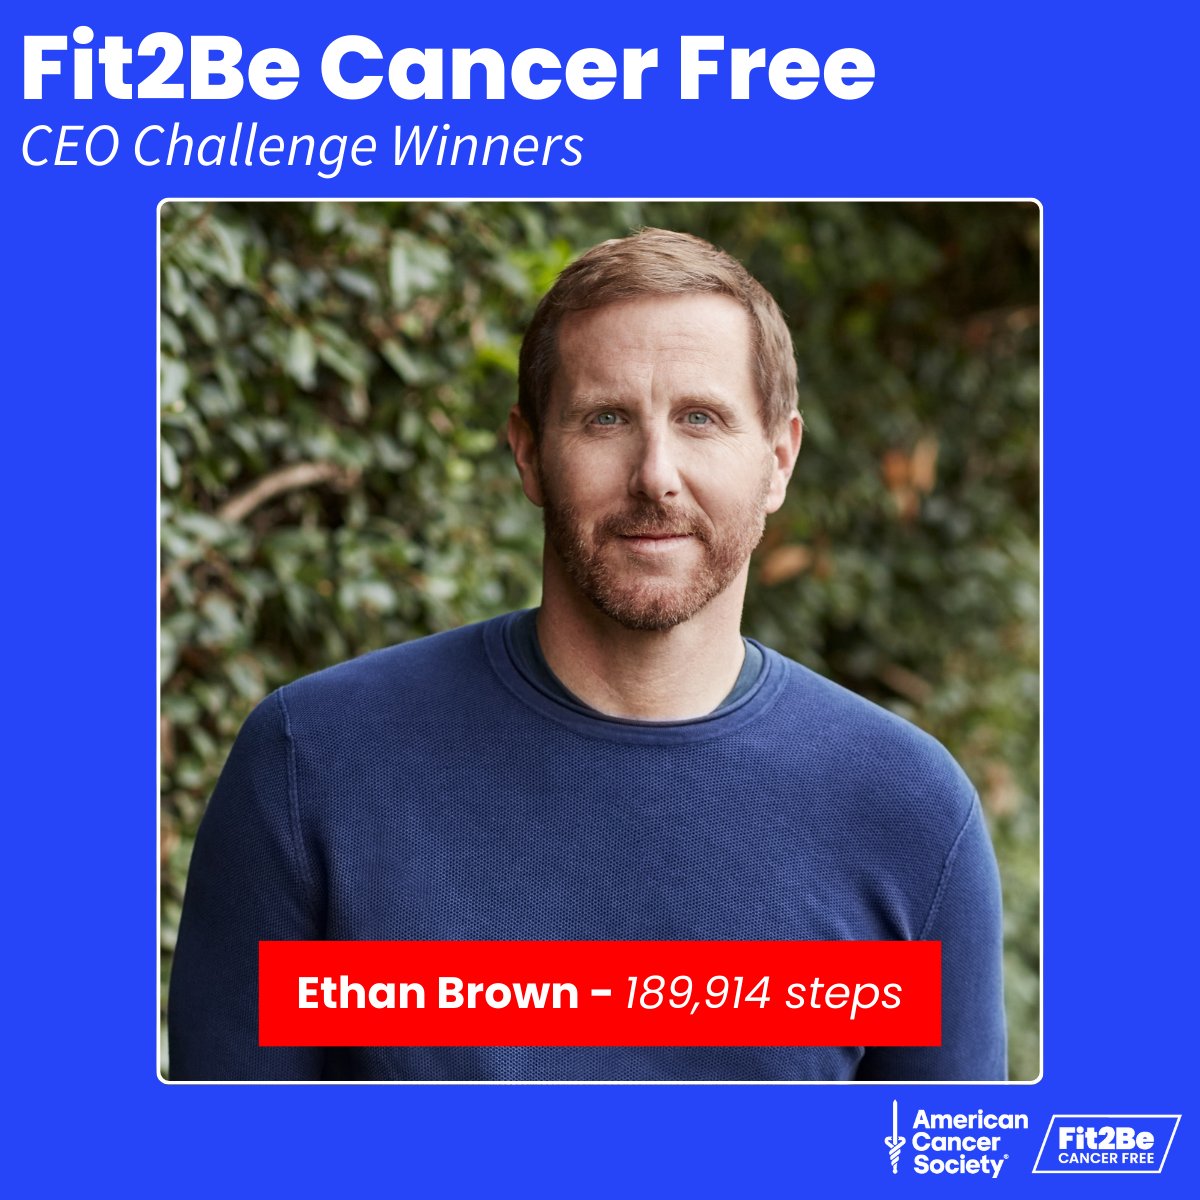 Karen Knudsen: A huge thank you to the 74 CEOs who participated in our one-day Fit2BeCancerFree CEO Challenge